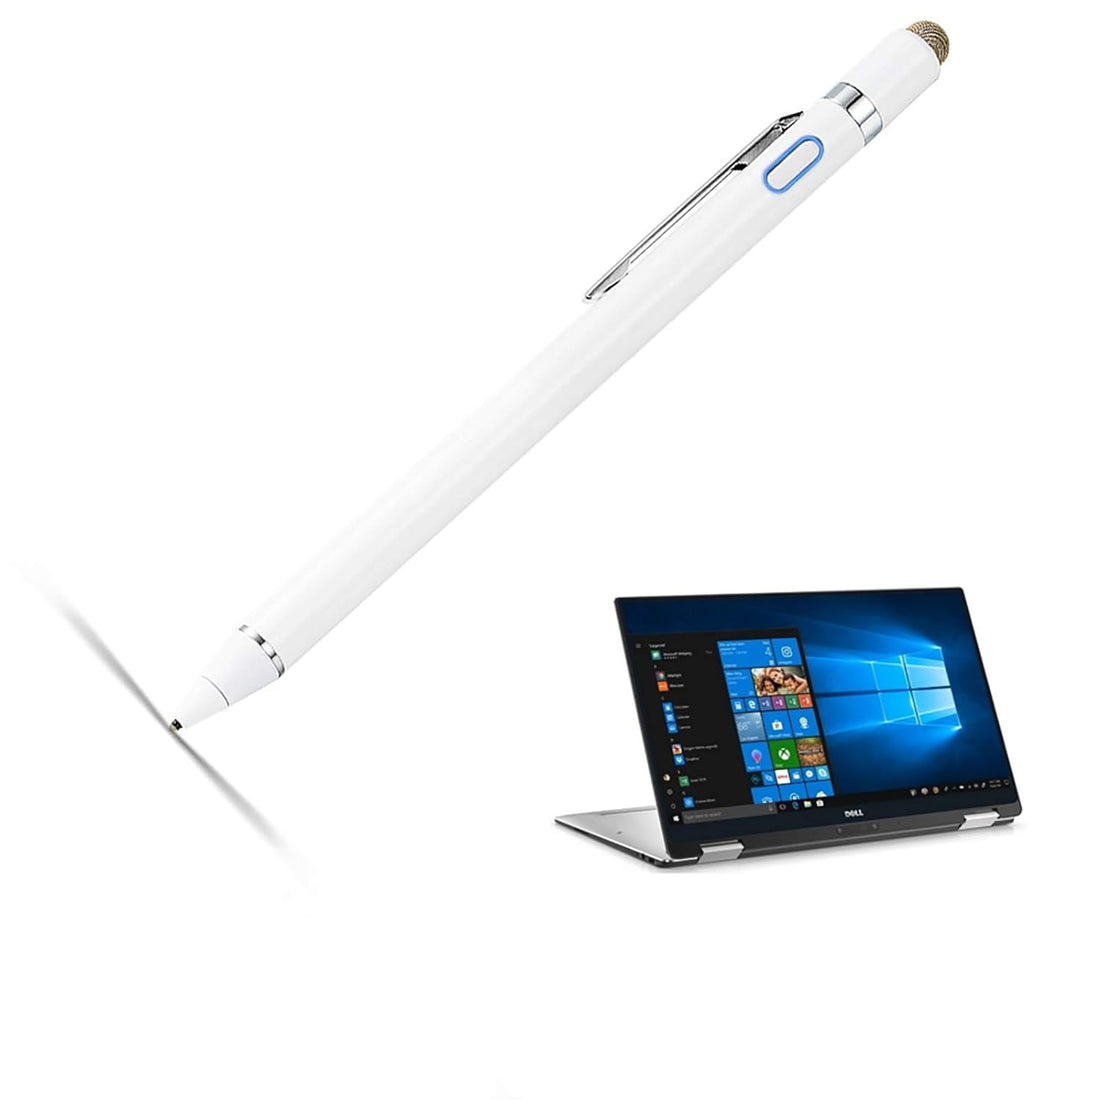 Stylus for Dell 2 in 1 Laptop Pencil, EVACH Digital Pencil with 1.5mm Ultra Fine Tip Stylus Pen for Dell 2 in 1 Laptop, White